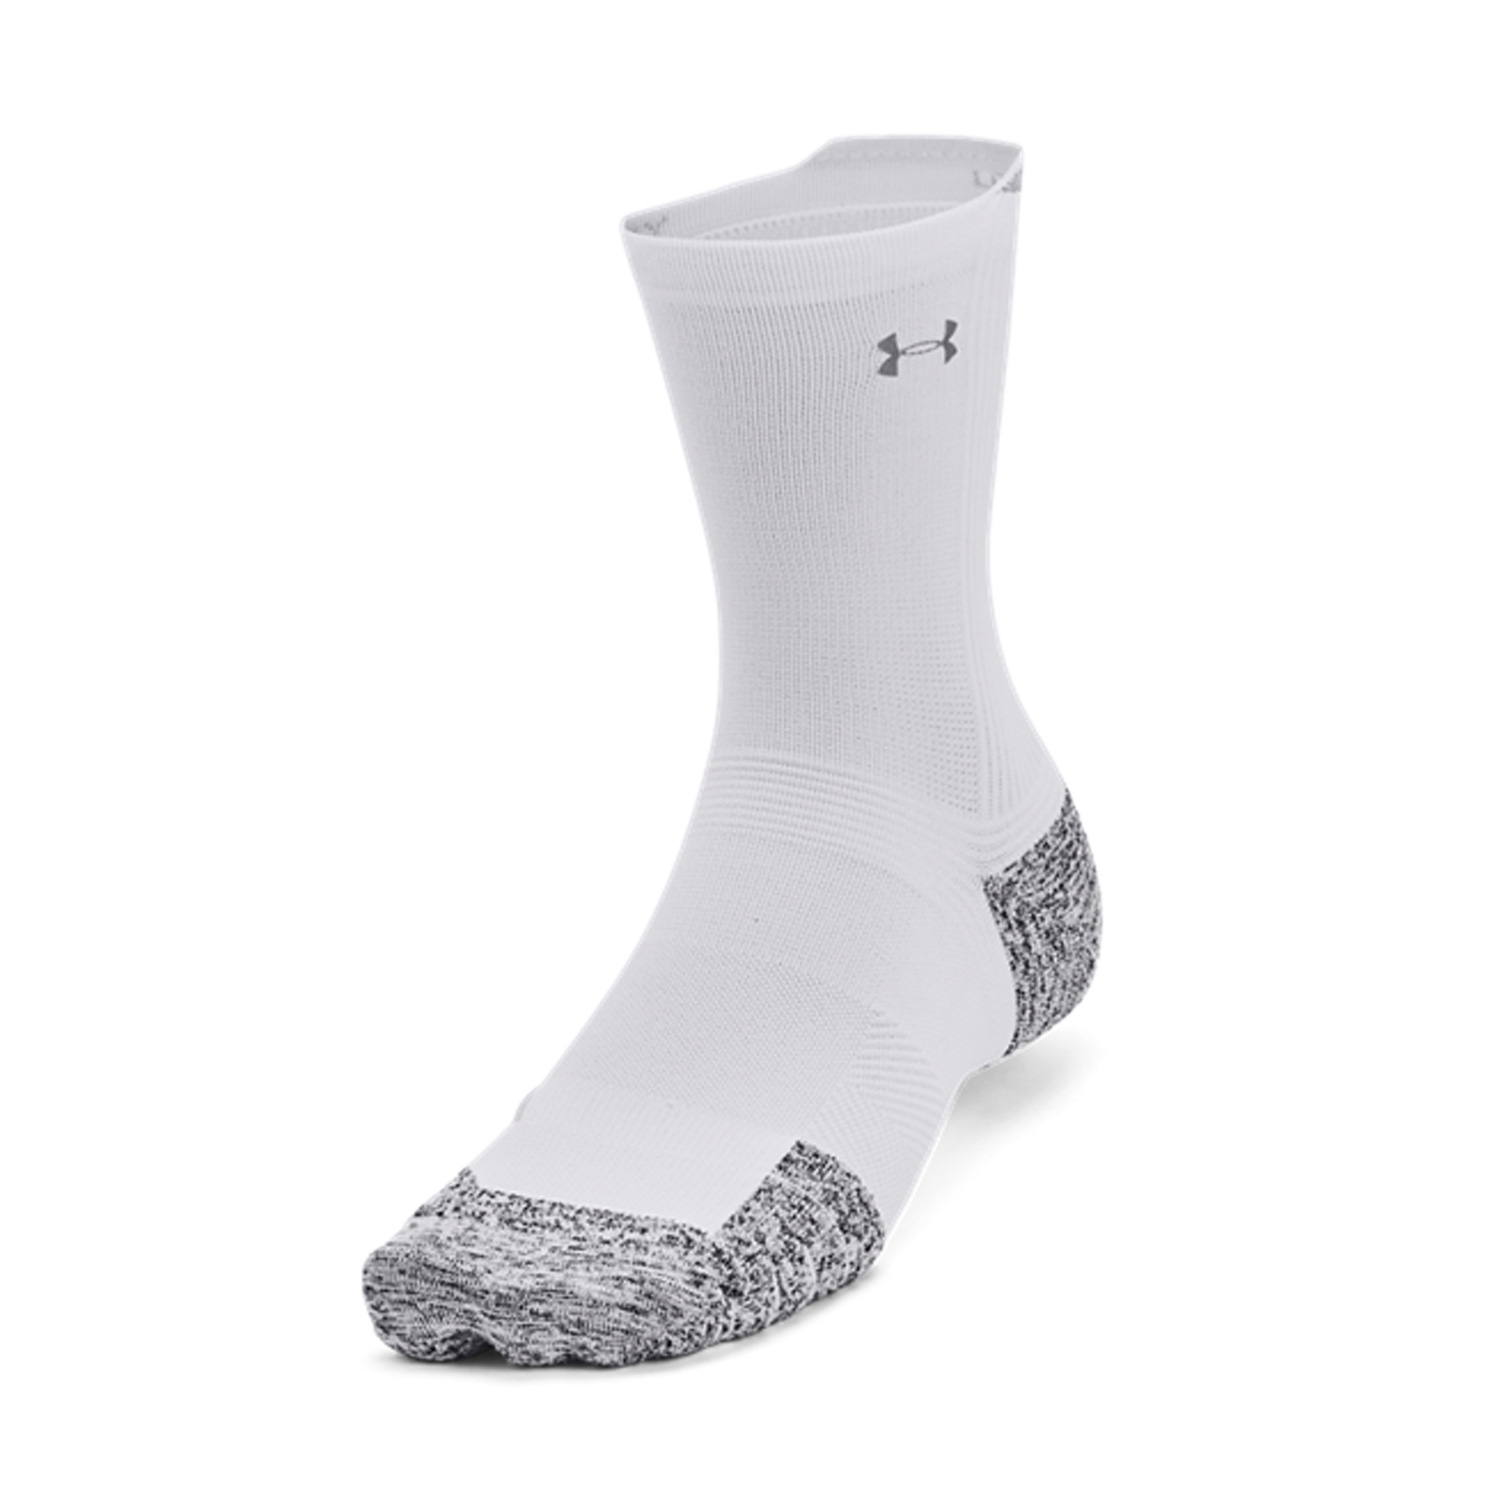 Under Armour ArmourDry Run Cushion Calcetines - White/Reflective